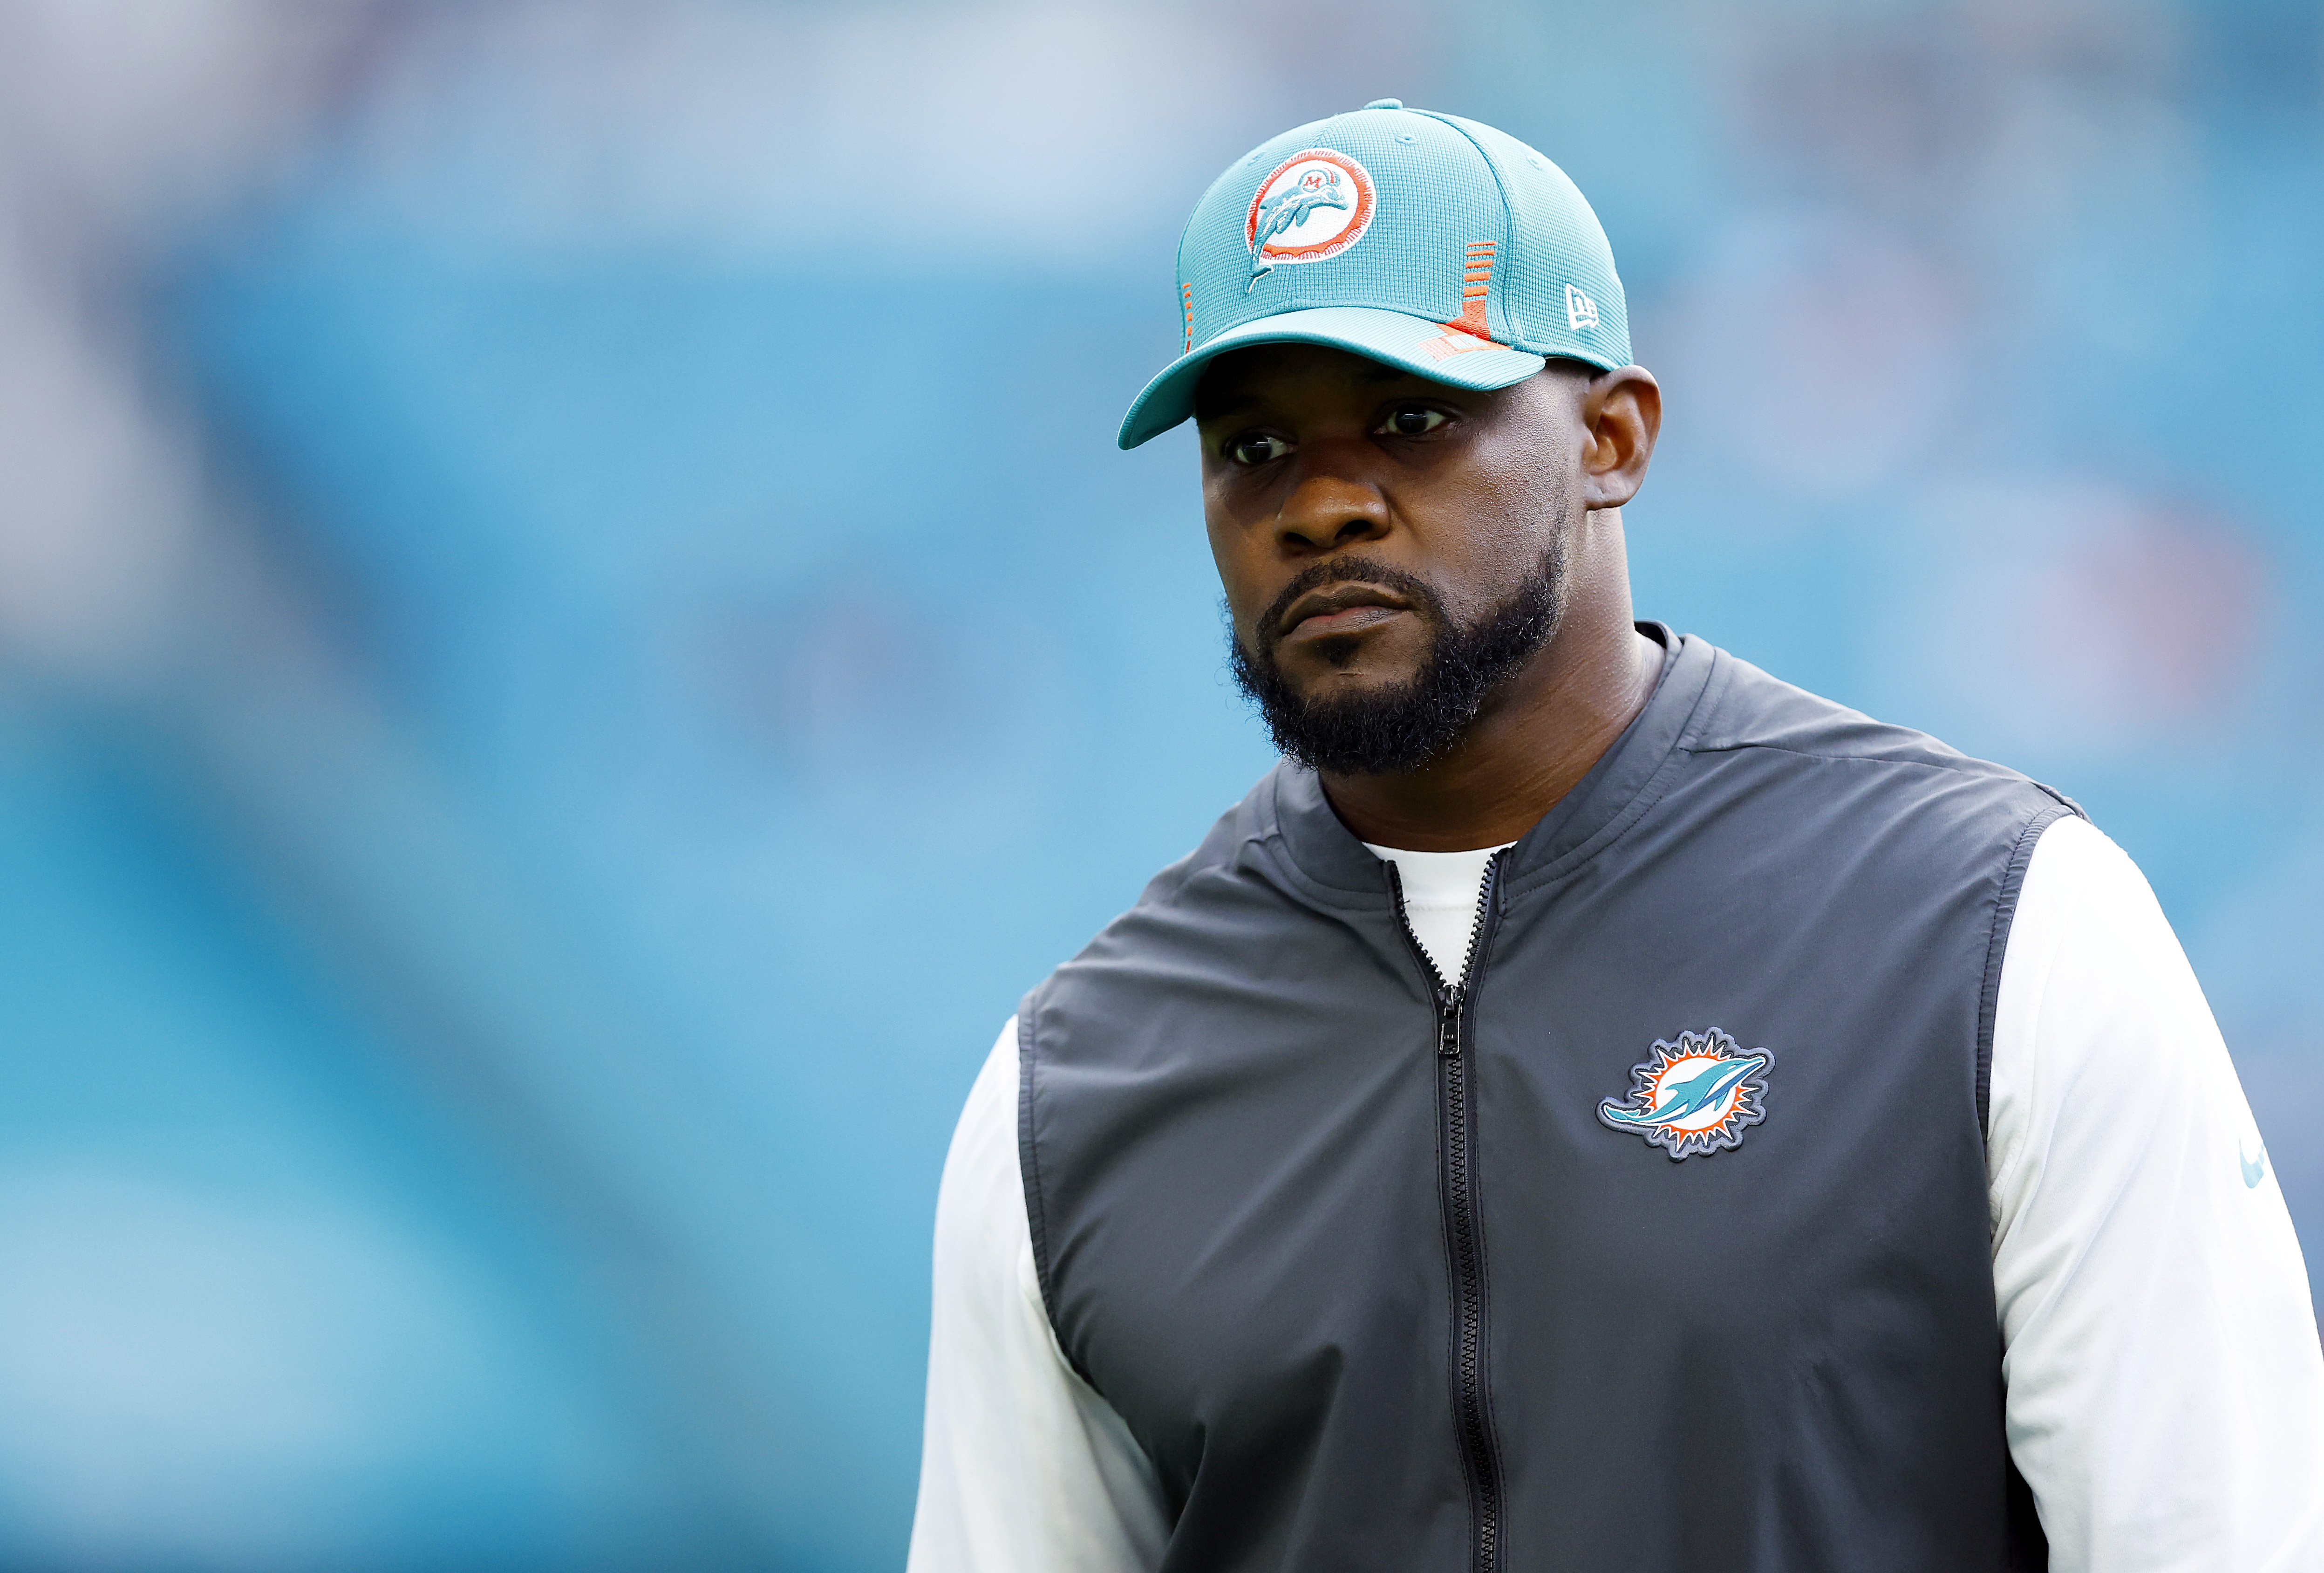 Former Dolphins head coach Brian Flores looks on before a game